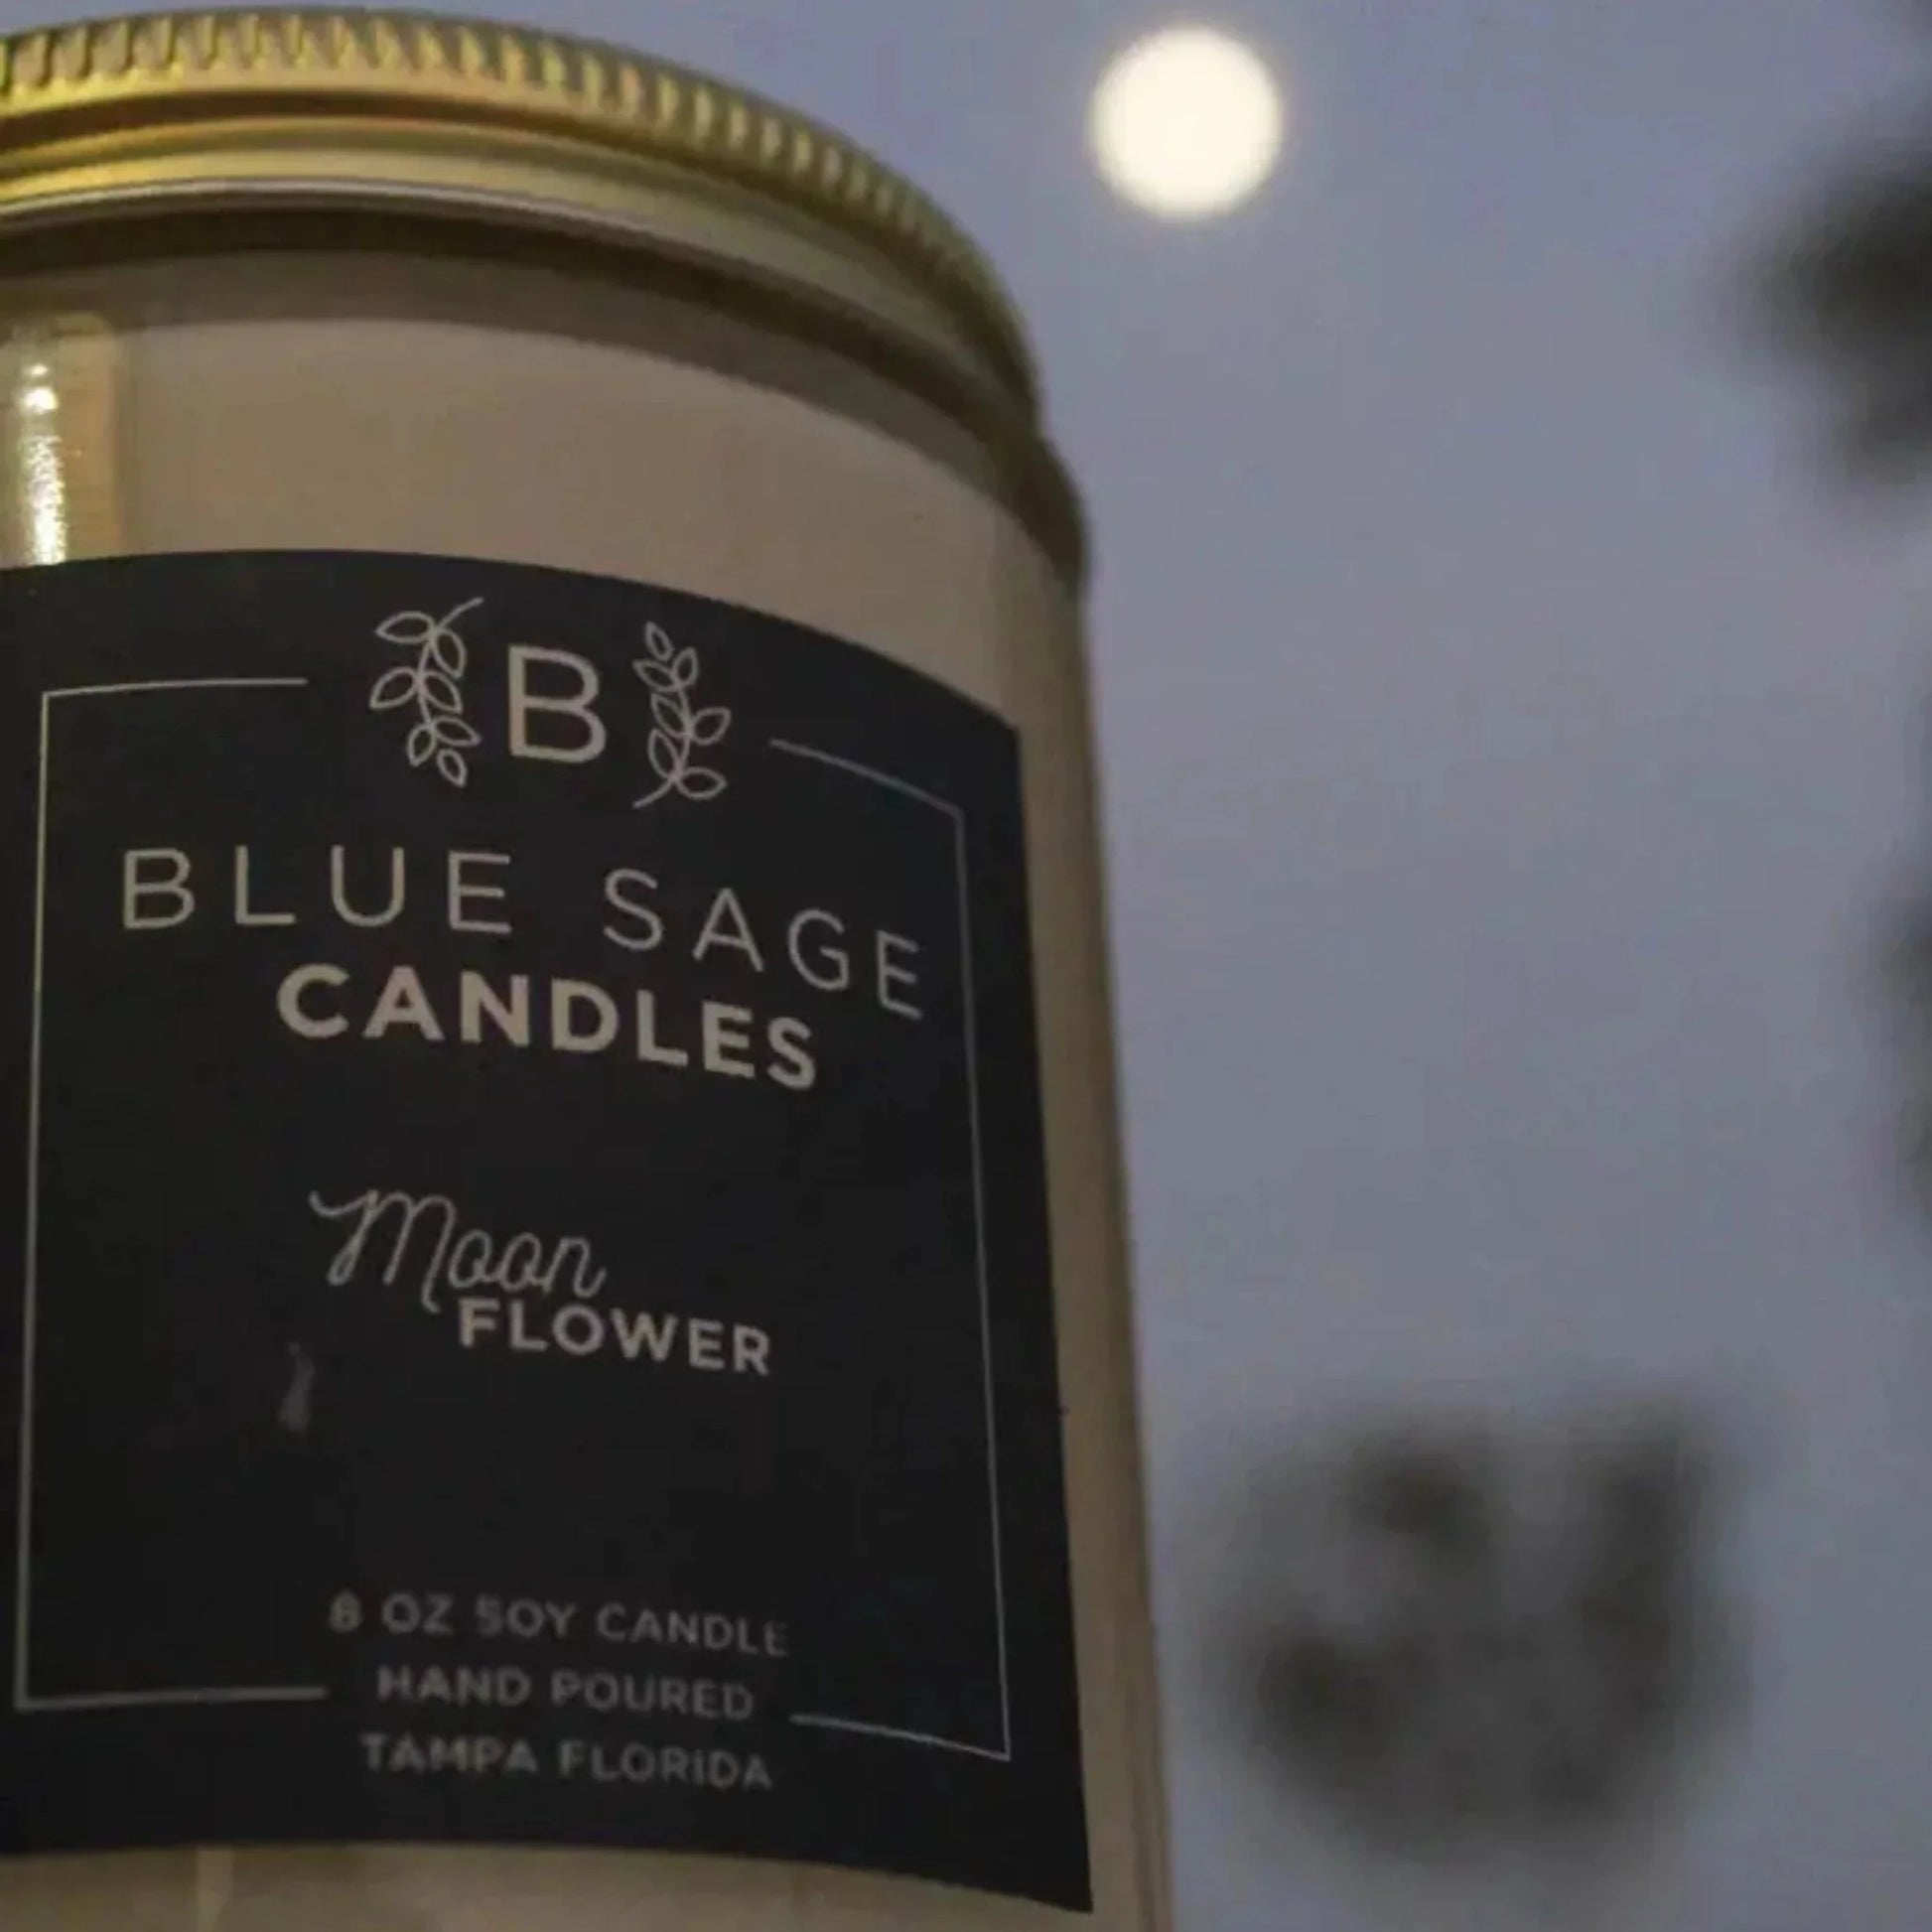 Blue Sage Moon Flower Scented Soy Wax Candle